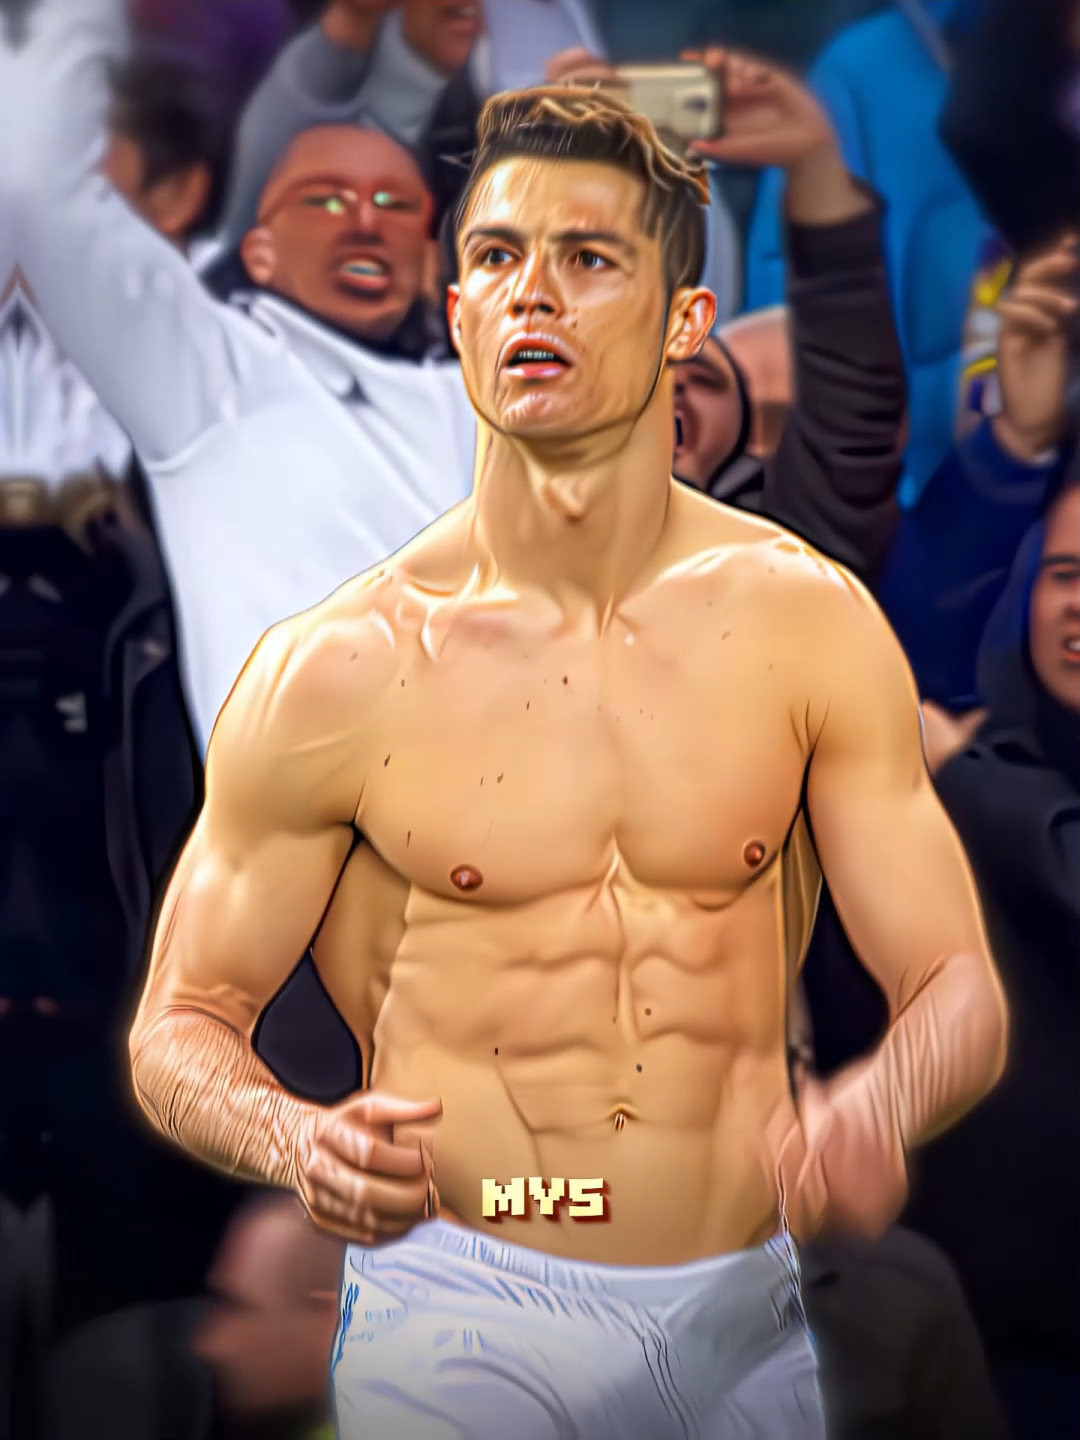 This Song With Ronaldo 🤩 II #cristiano #ronaldo #viral #fyp #edit #aftereffects #mys_fut